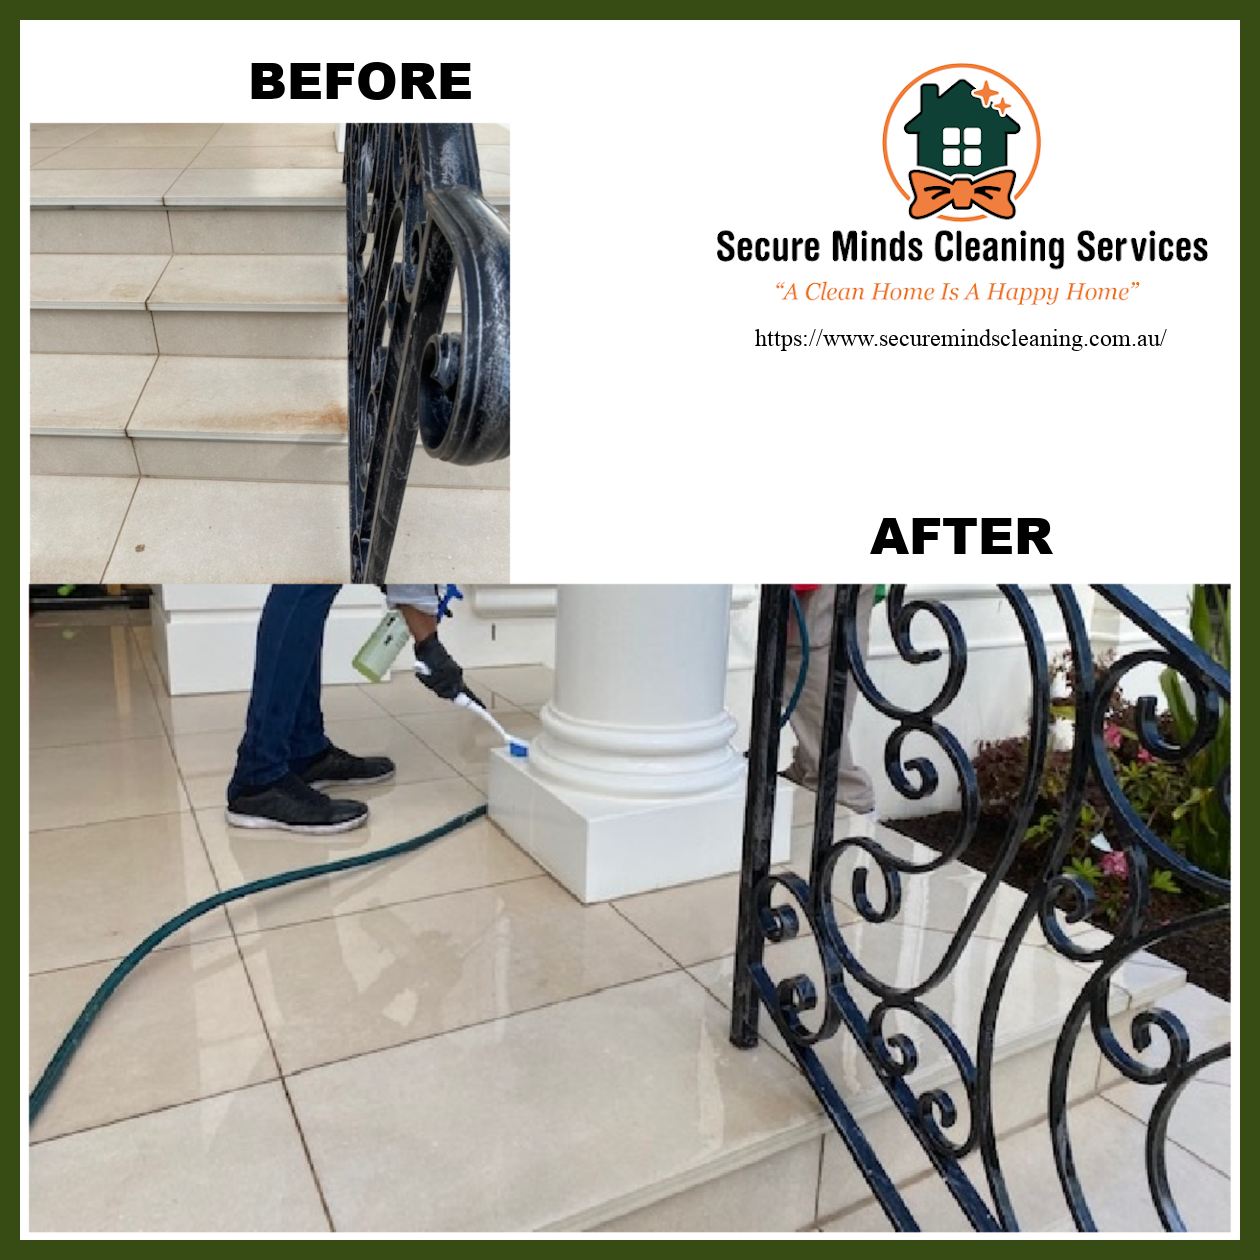 Before After affordable house cleaning services melbourne